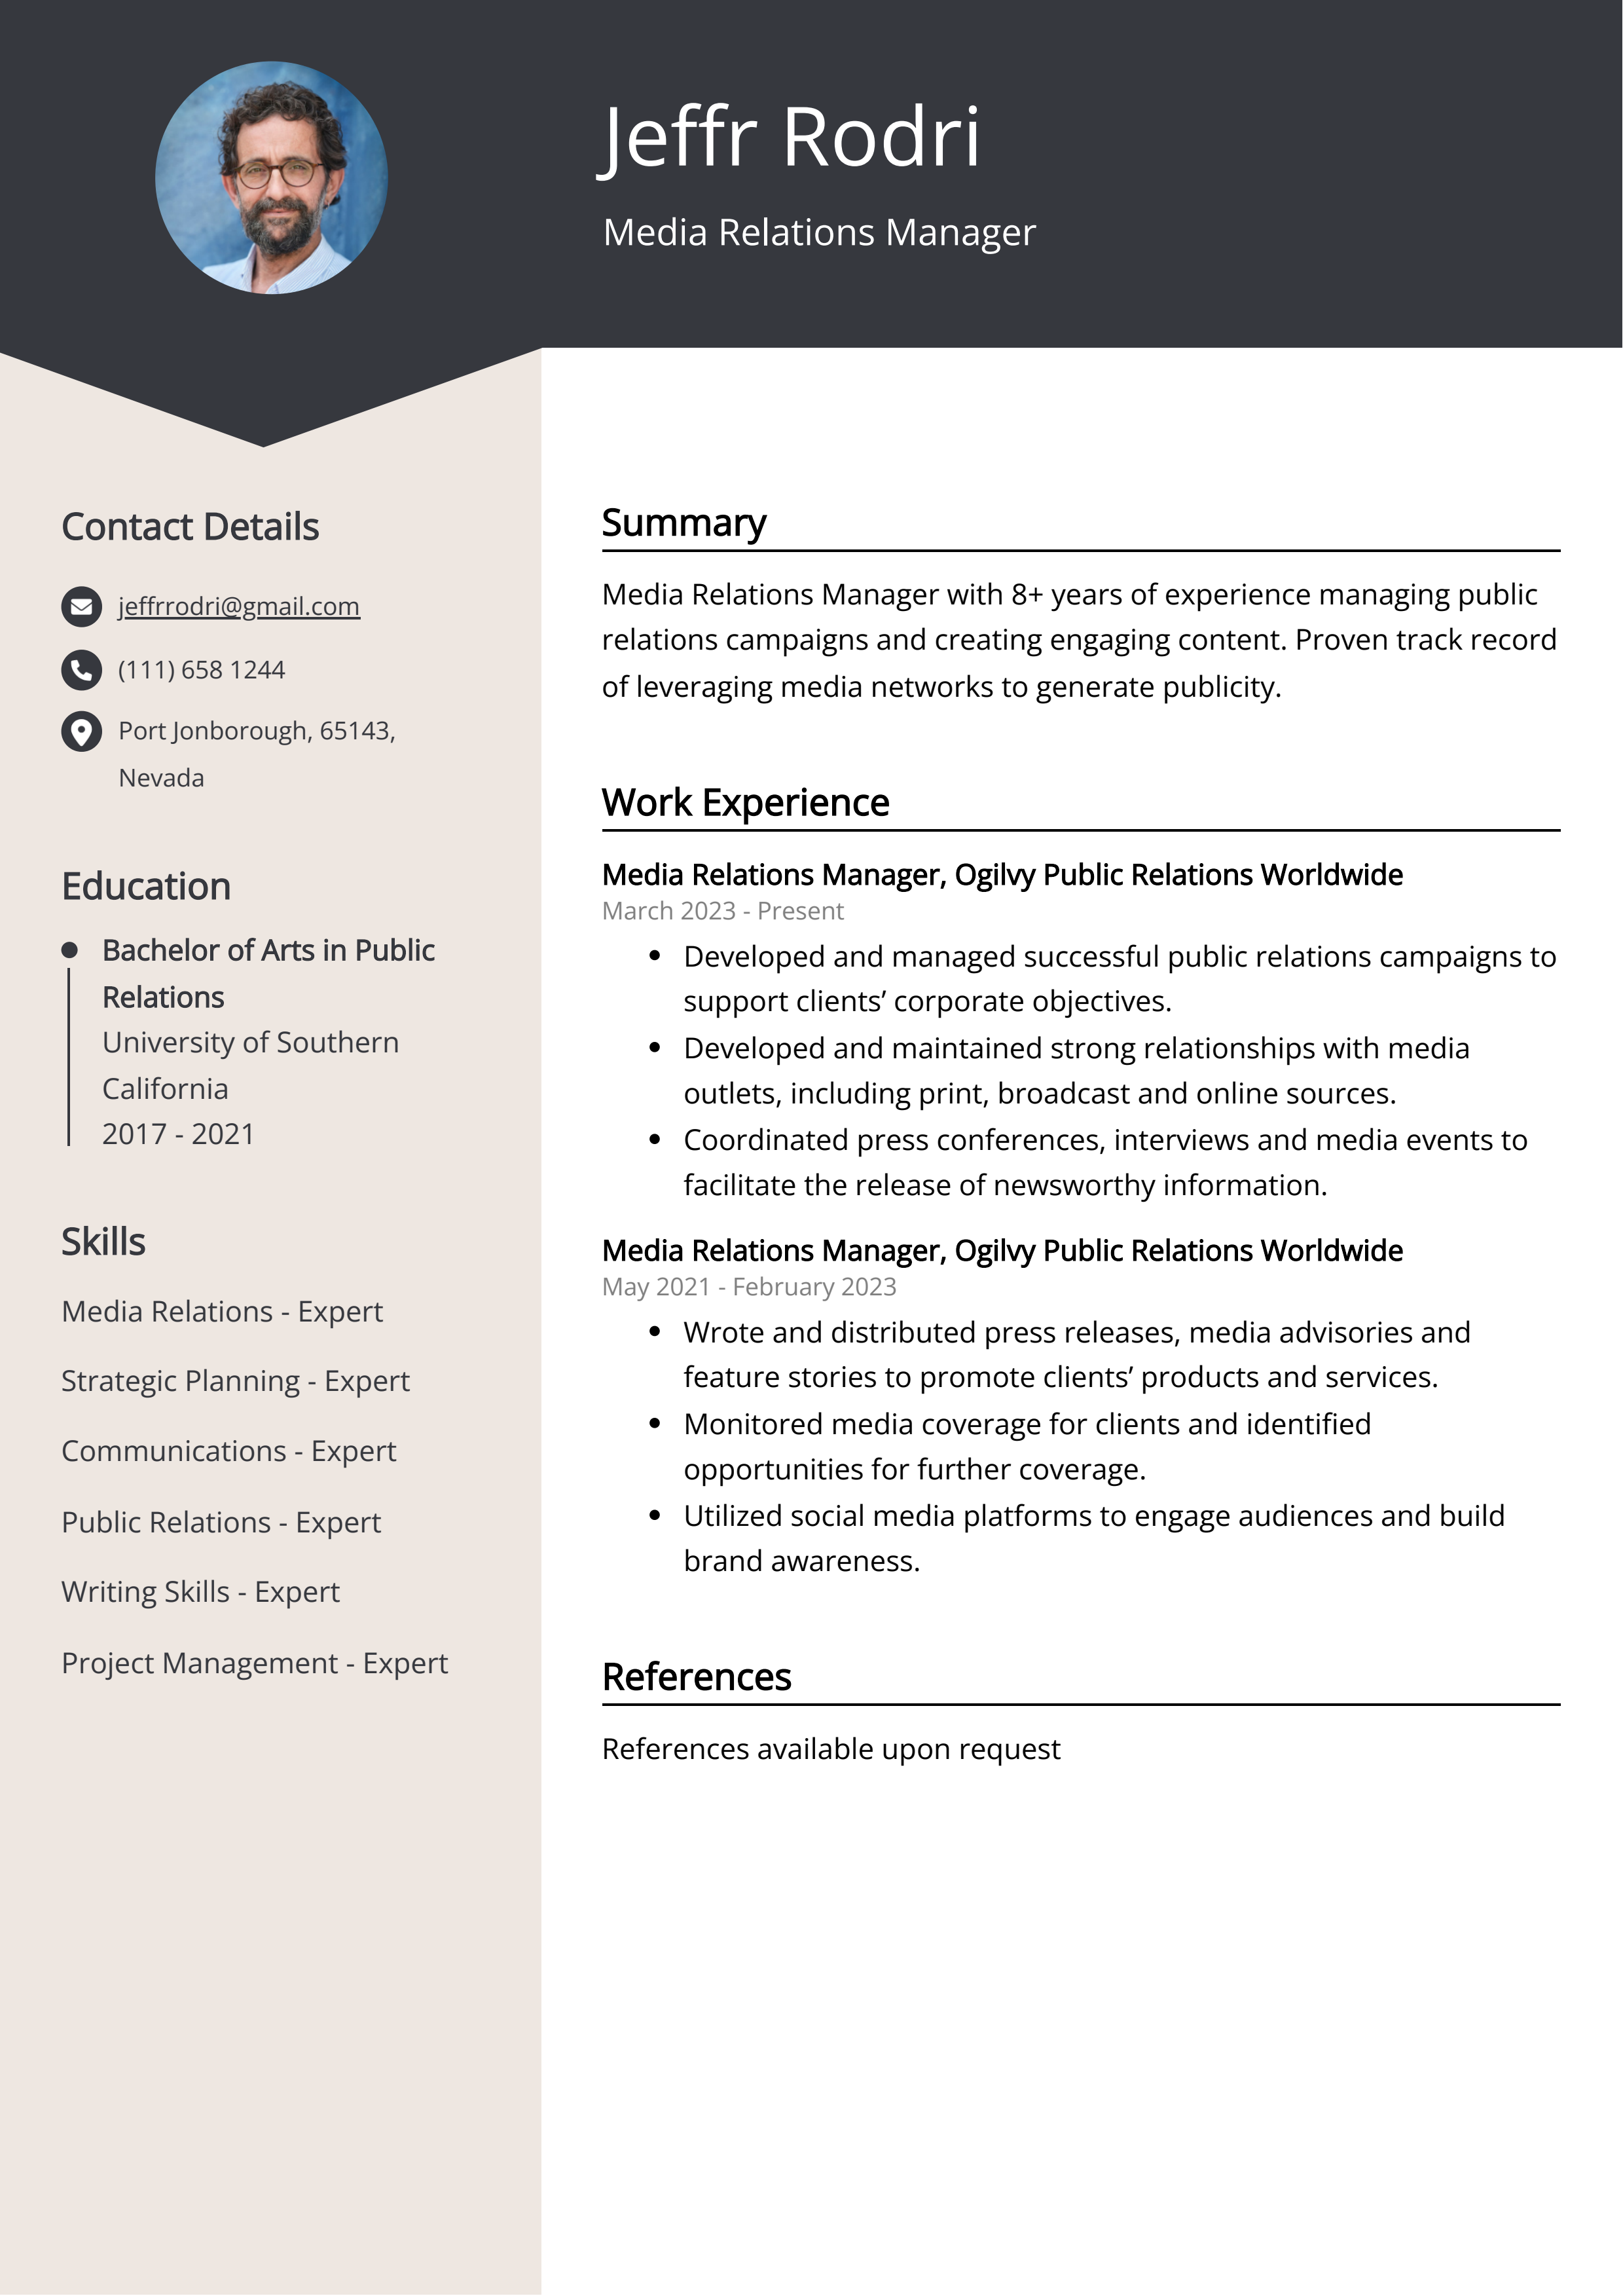 Media Relations Manager CV Example